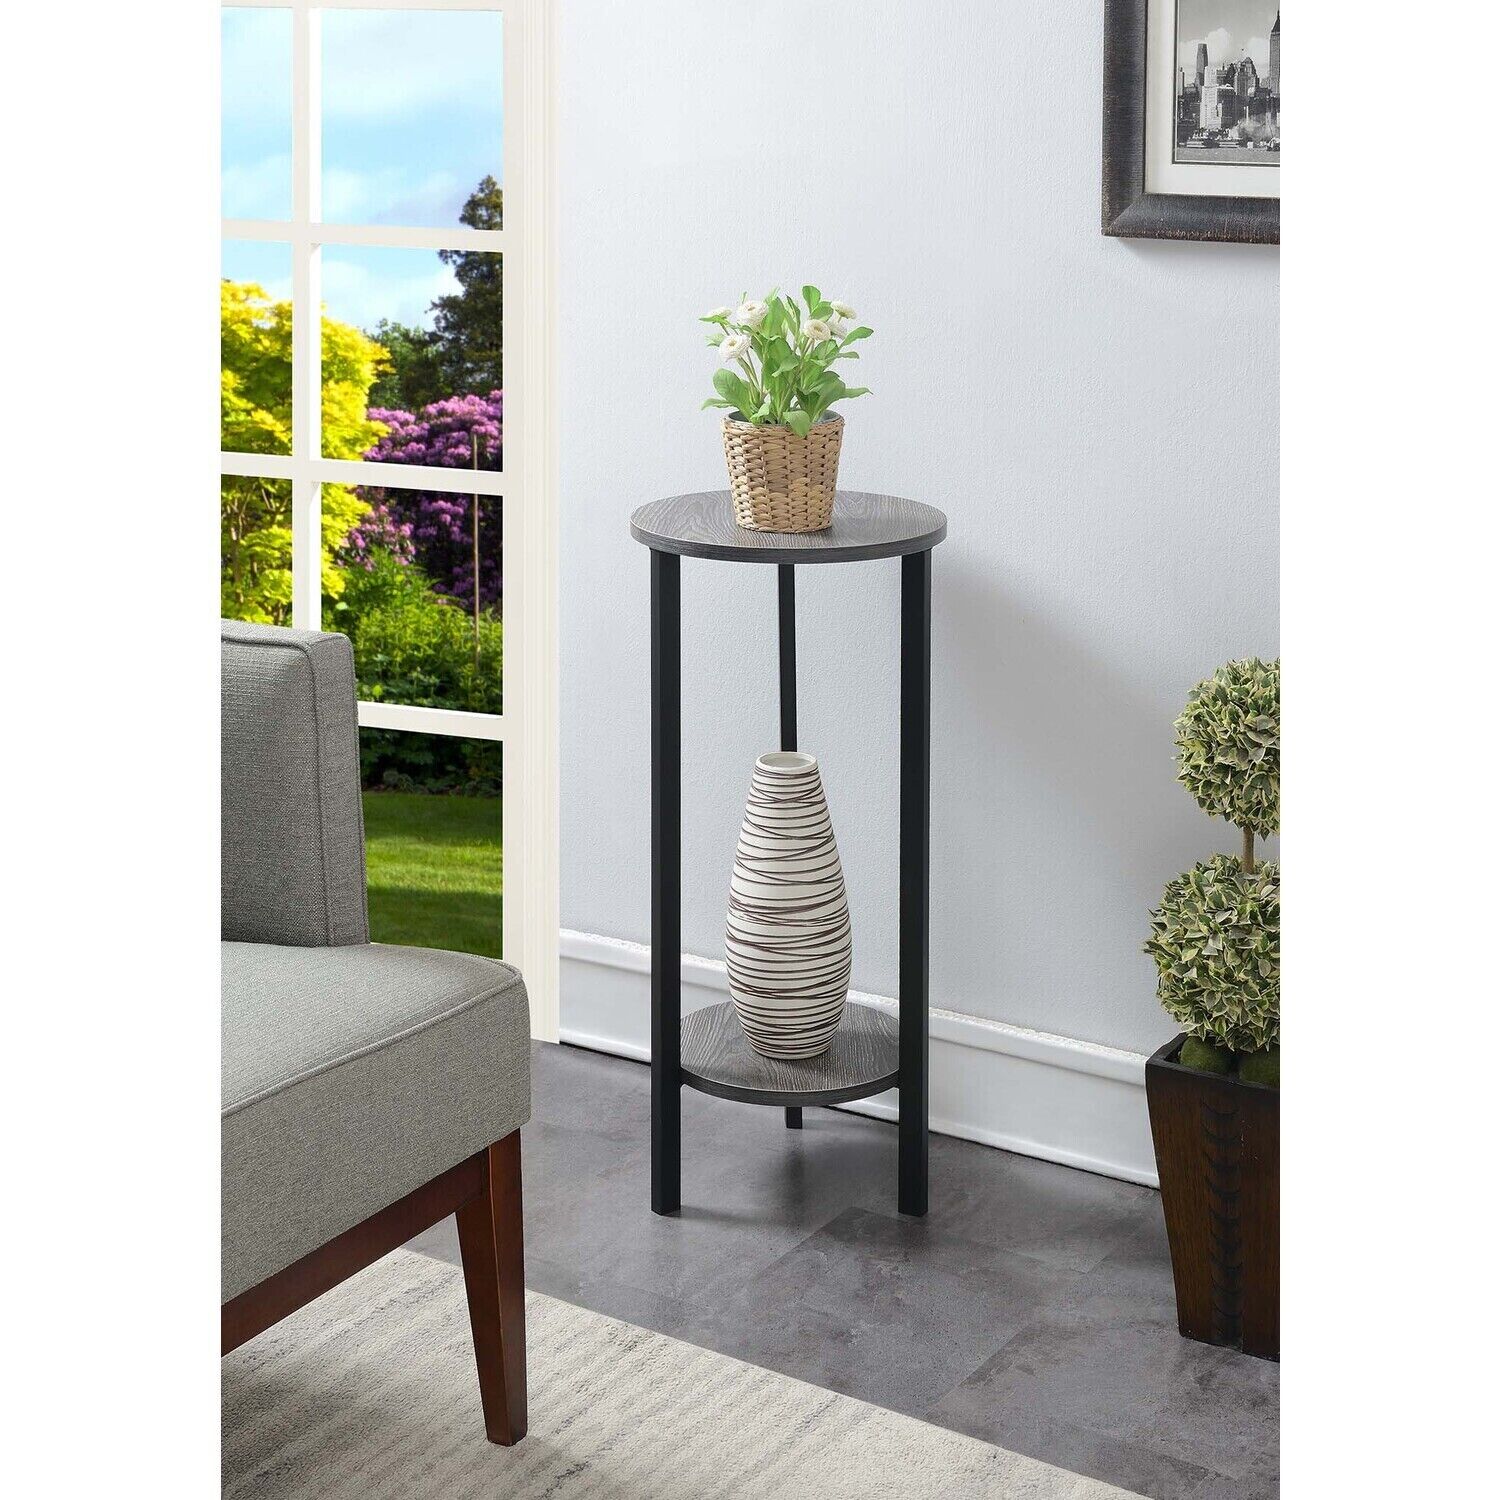 Convenience Concepts Graystone 31 Inch 2 Tier Plant Stand Weathered Gray/black